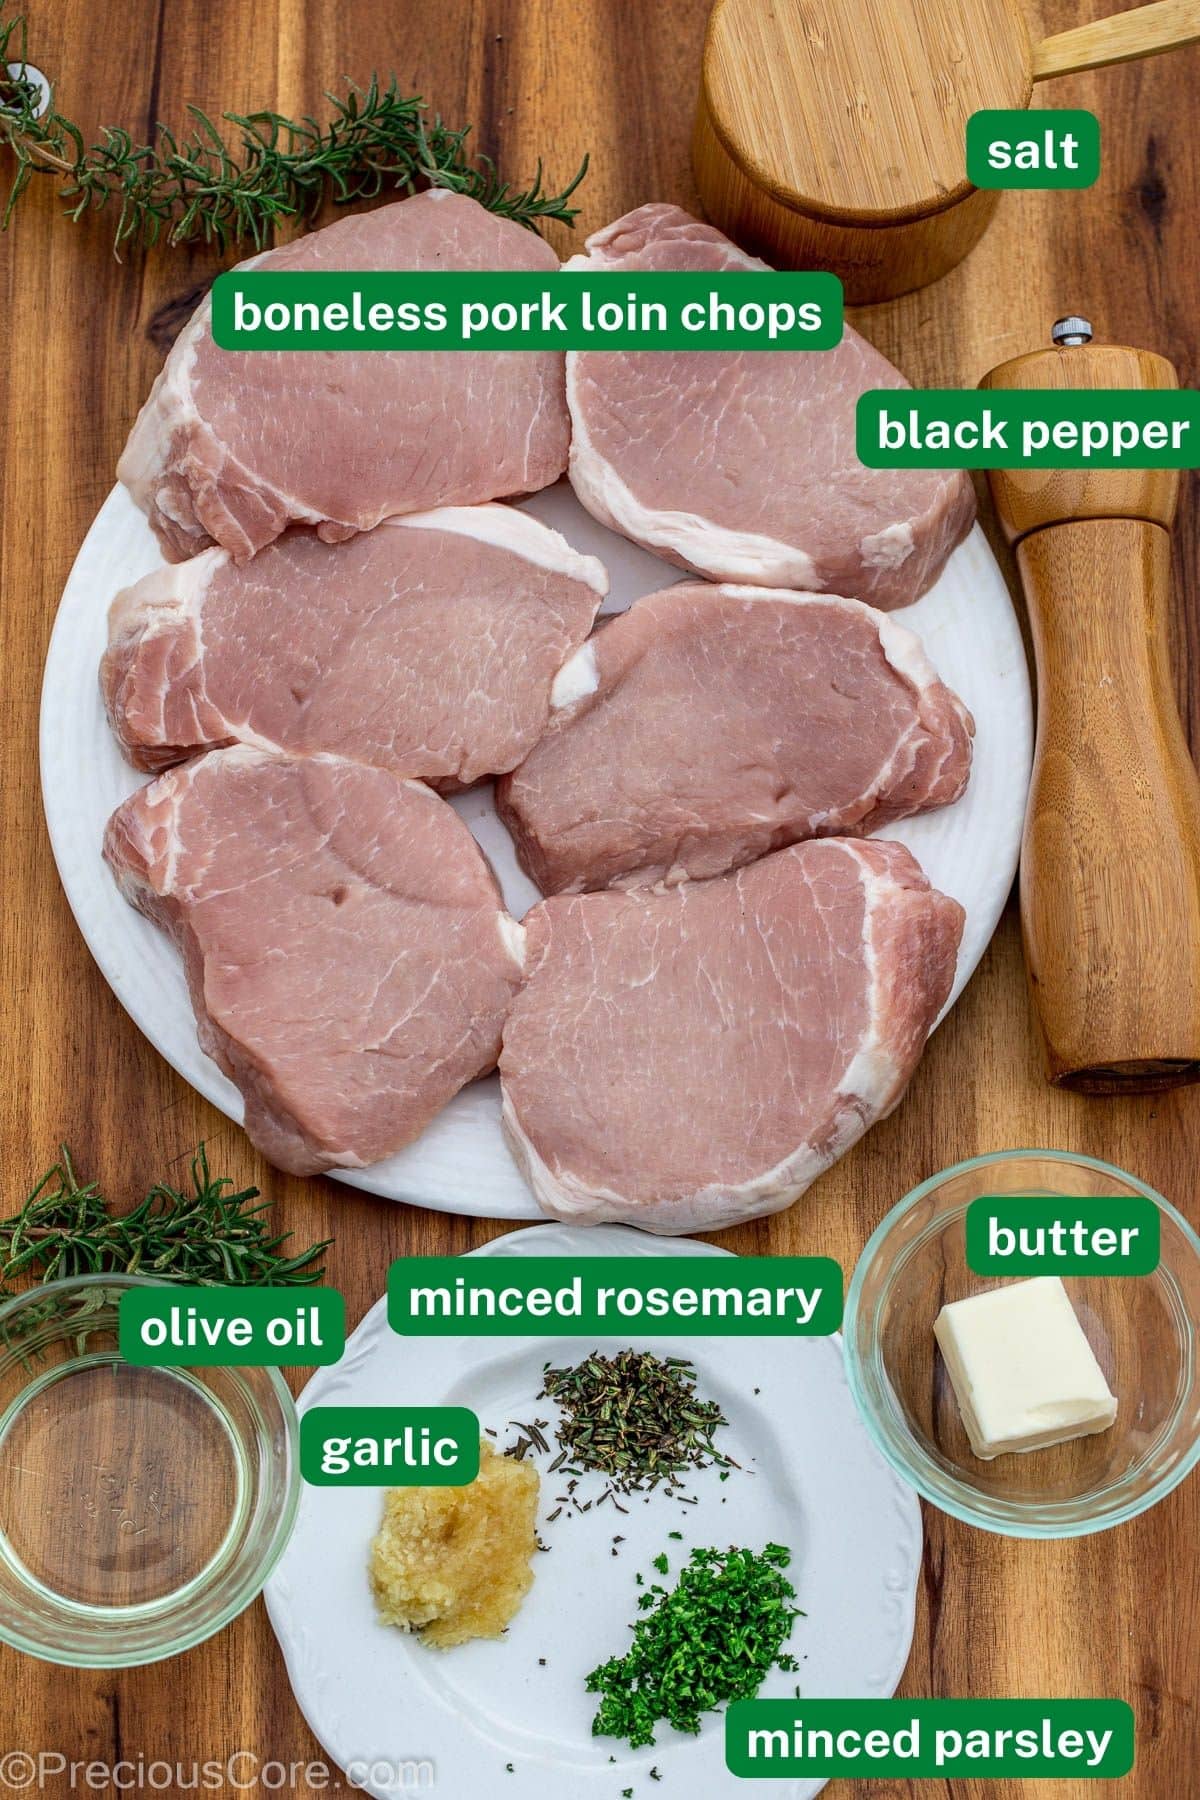 Ingredients for pork chops with labels over the ingredients.